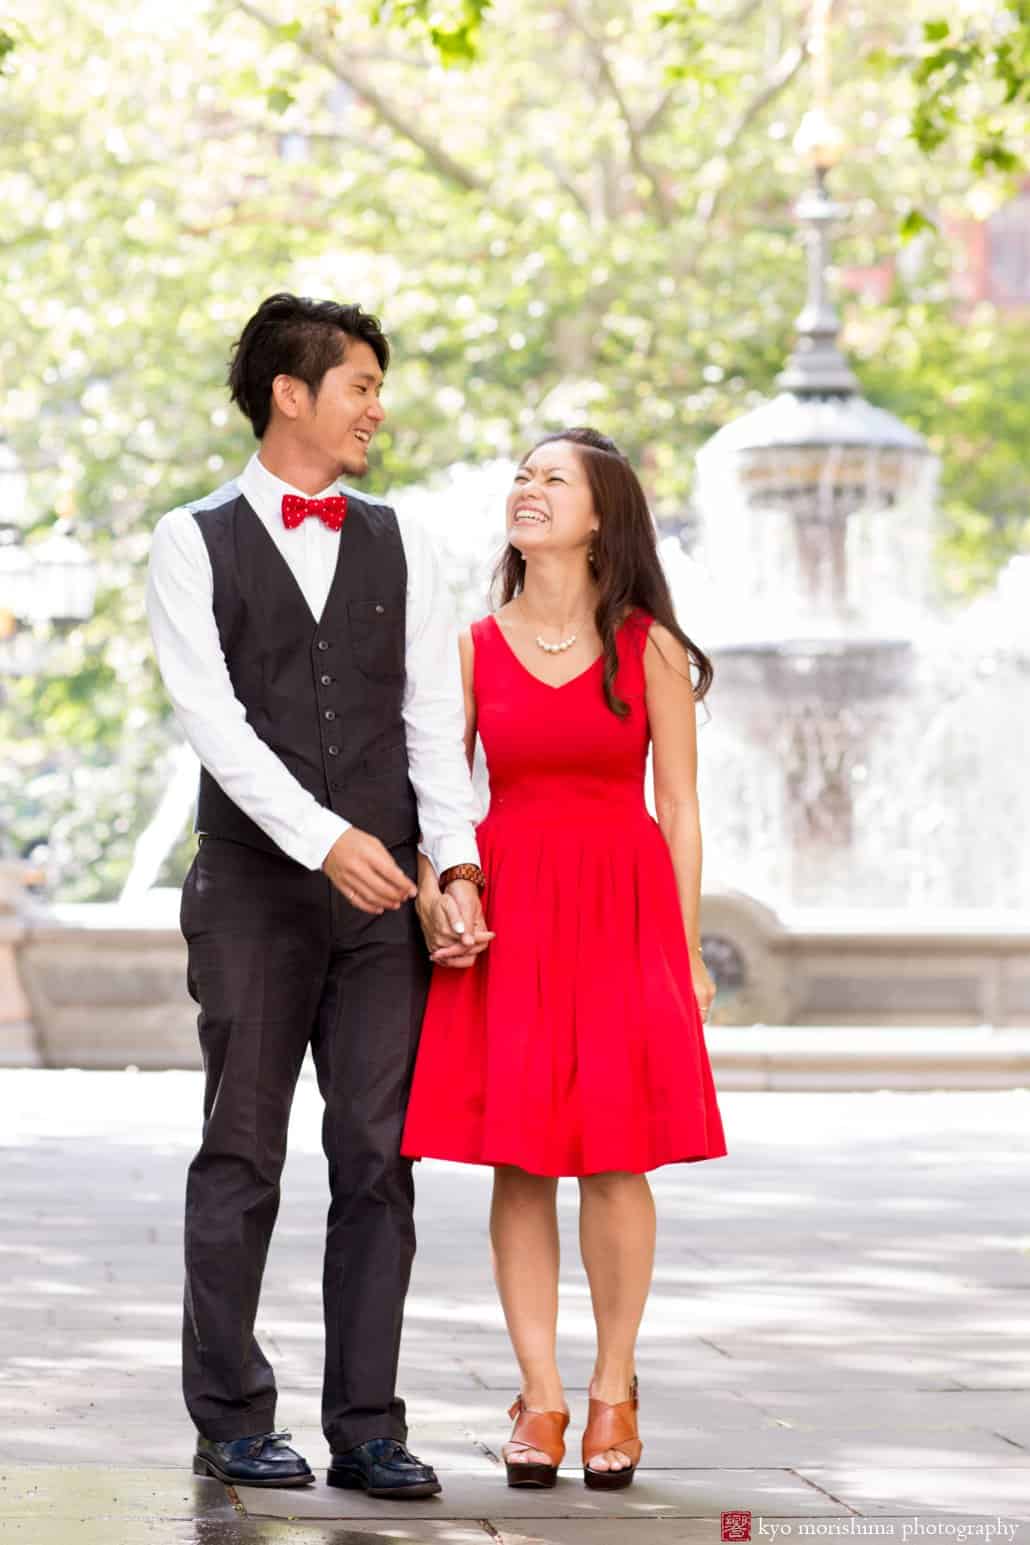 Japanese couple smiles near fountain in downtown NYC; engagement photo photographed by Kyo Morishima